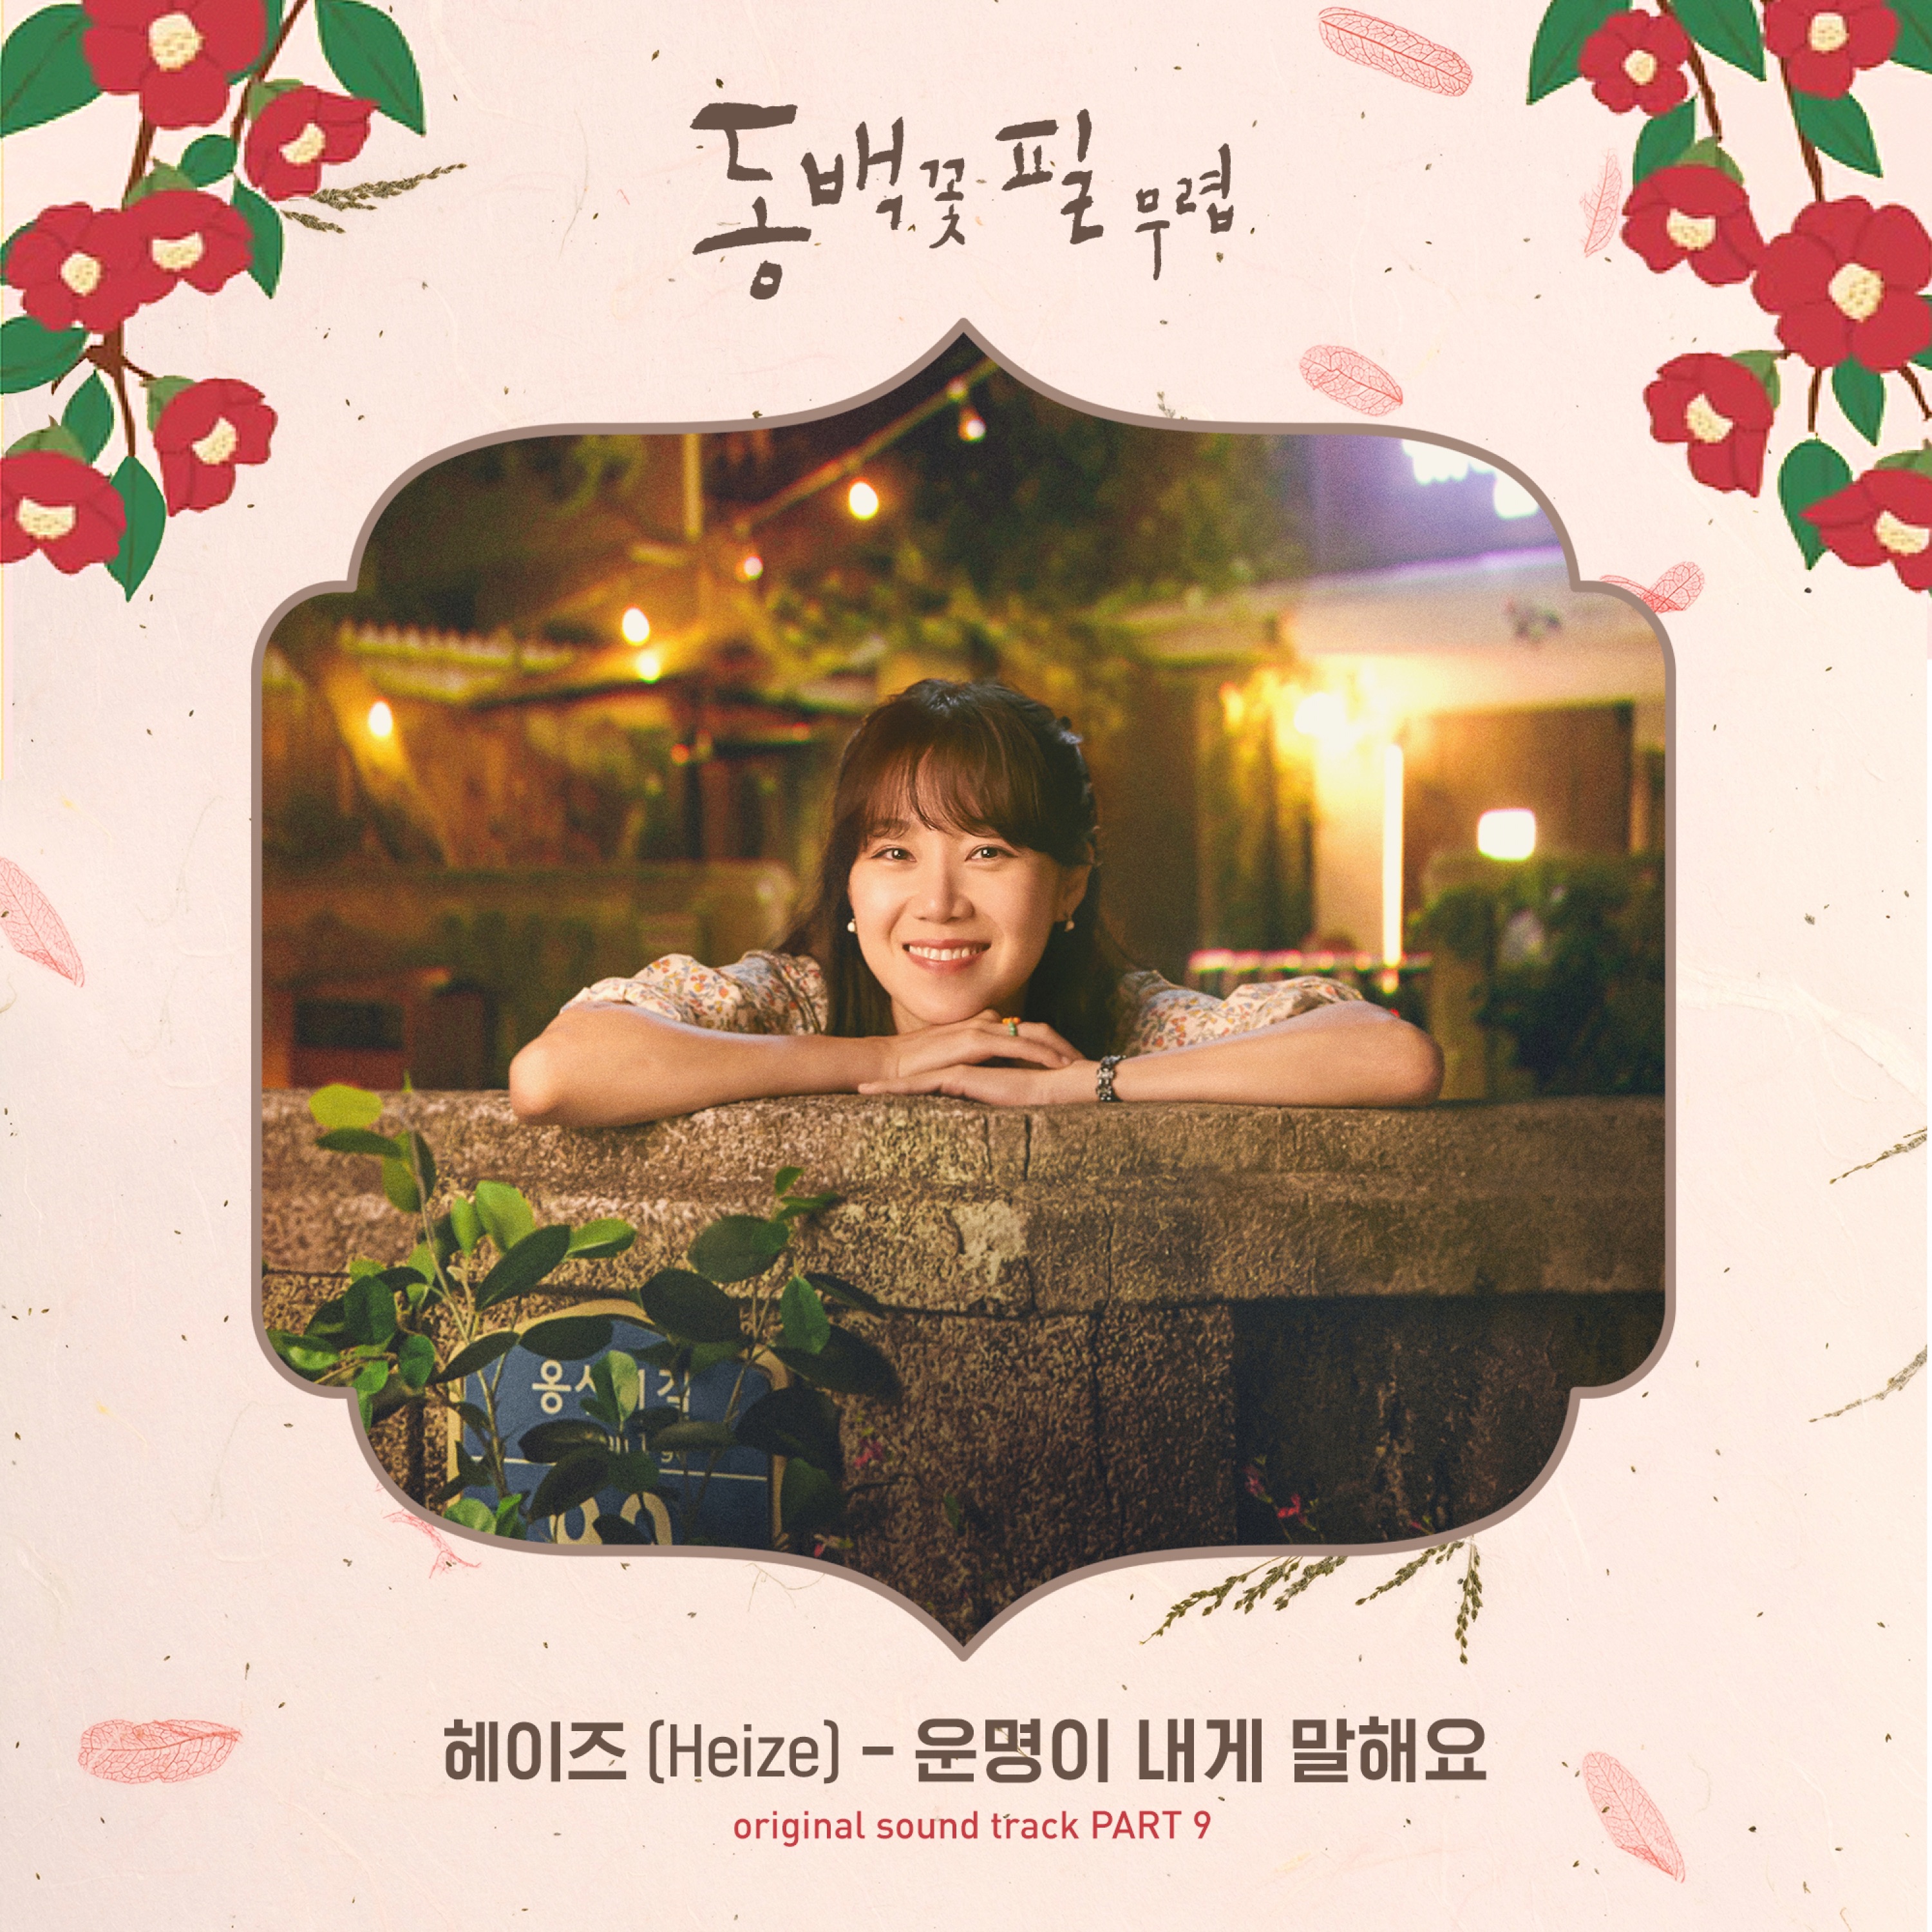 Singles 9. When the Camellia Blooms OST. Kim Hee won friend Snowdrop OST Part 2.